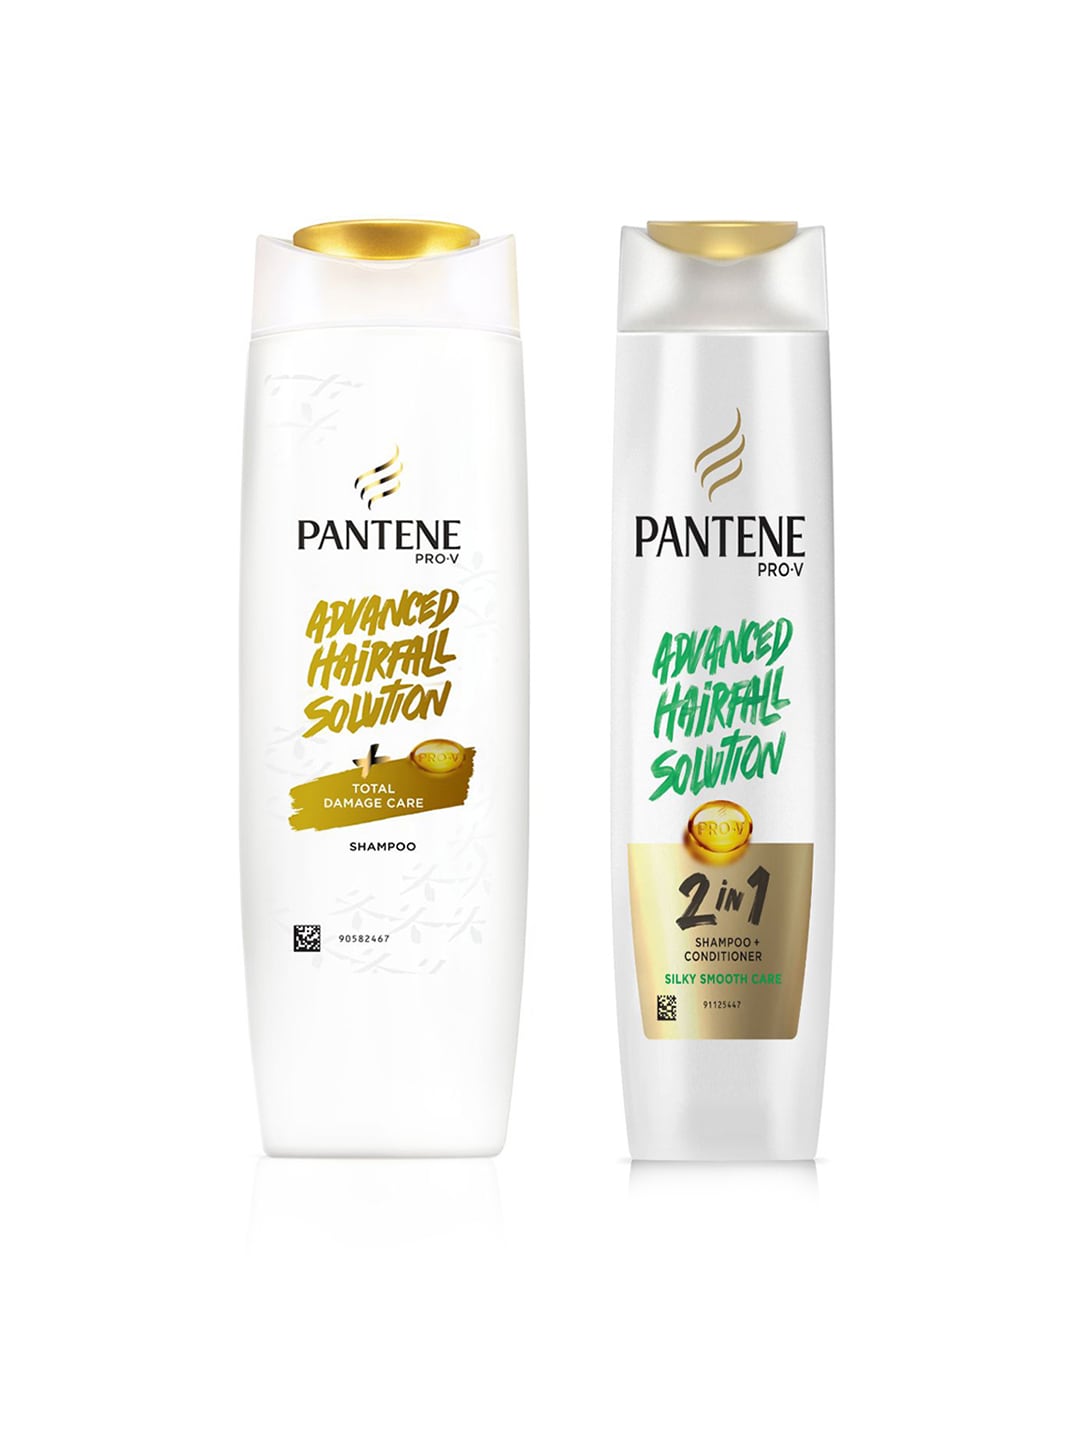 Pantene Set of Advanced Total Damage Care Shampoo & 2 in 1 Shampoo+ Conditioner Price in India